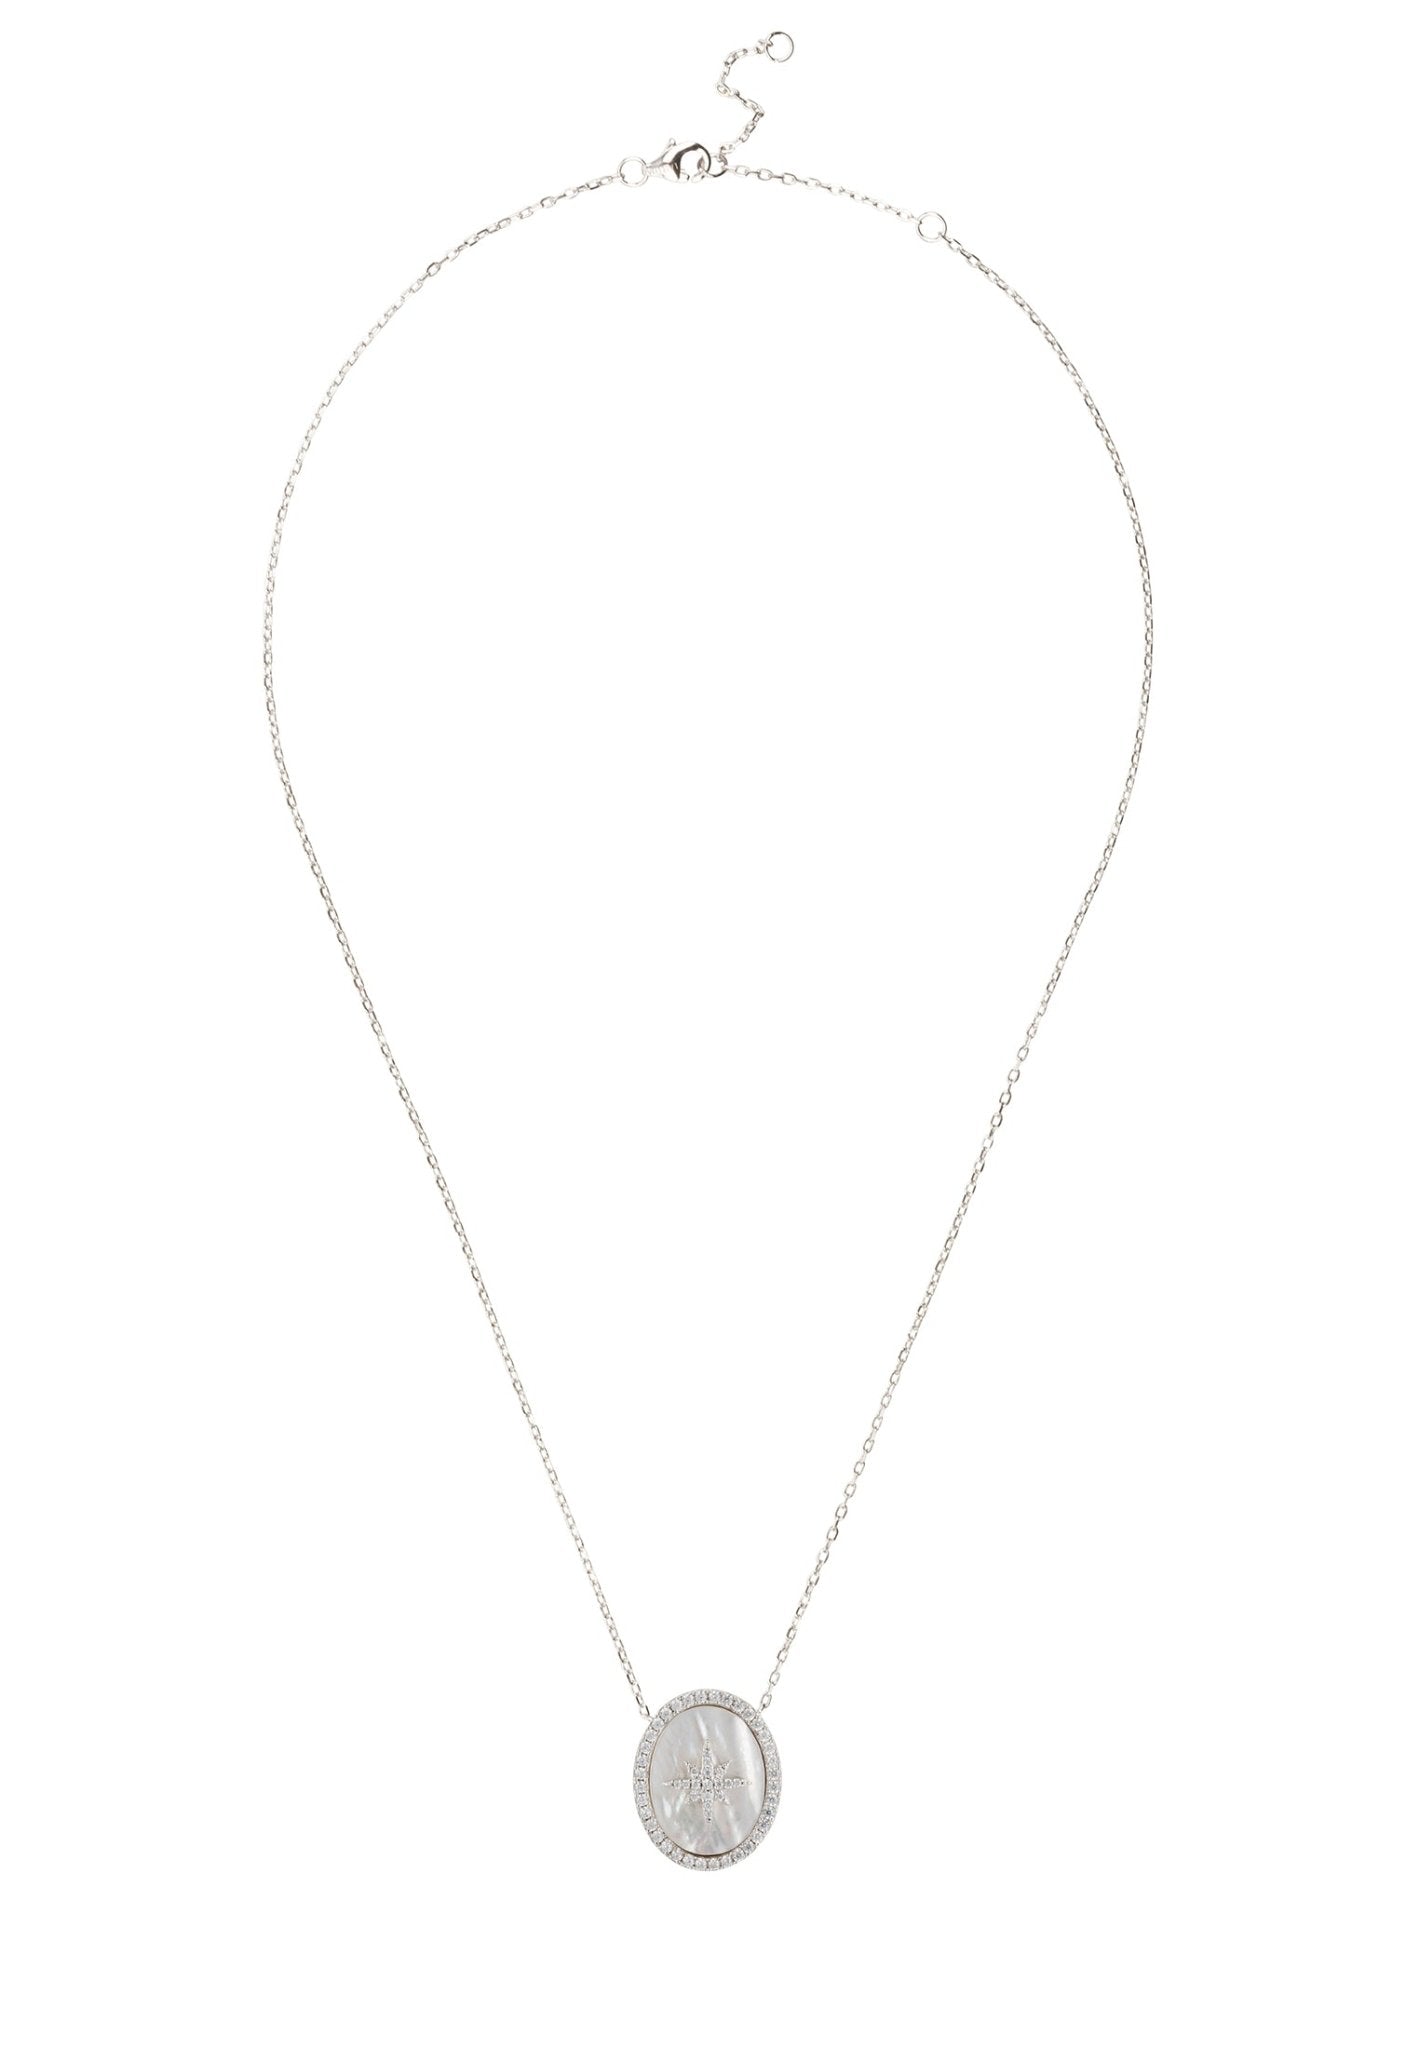 Starburst Oval Pendant Necklace Mother Of Pearl Silver - LATELITA Necklaces